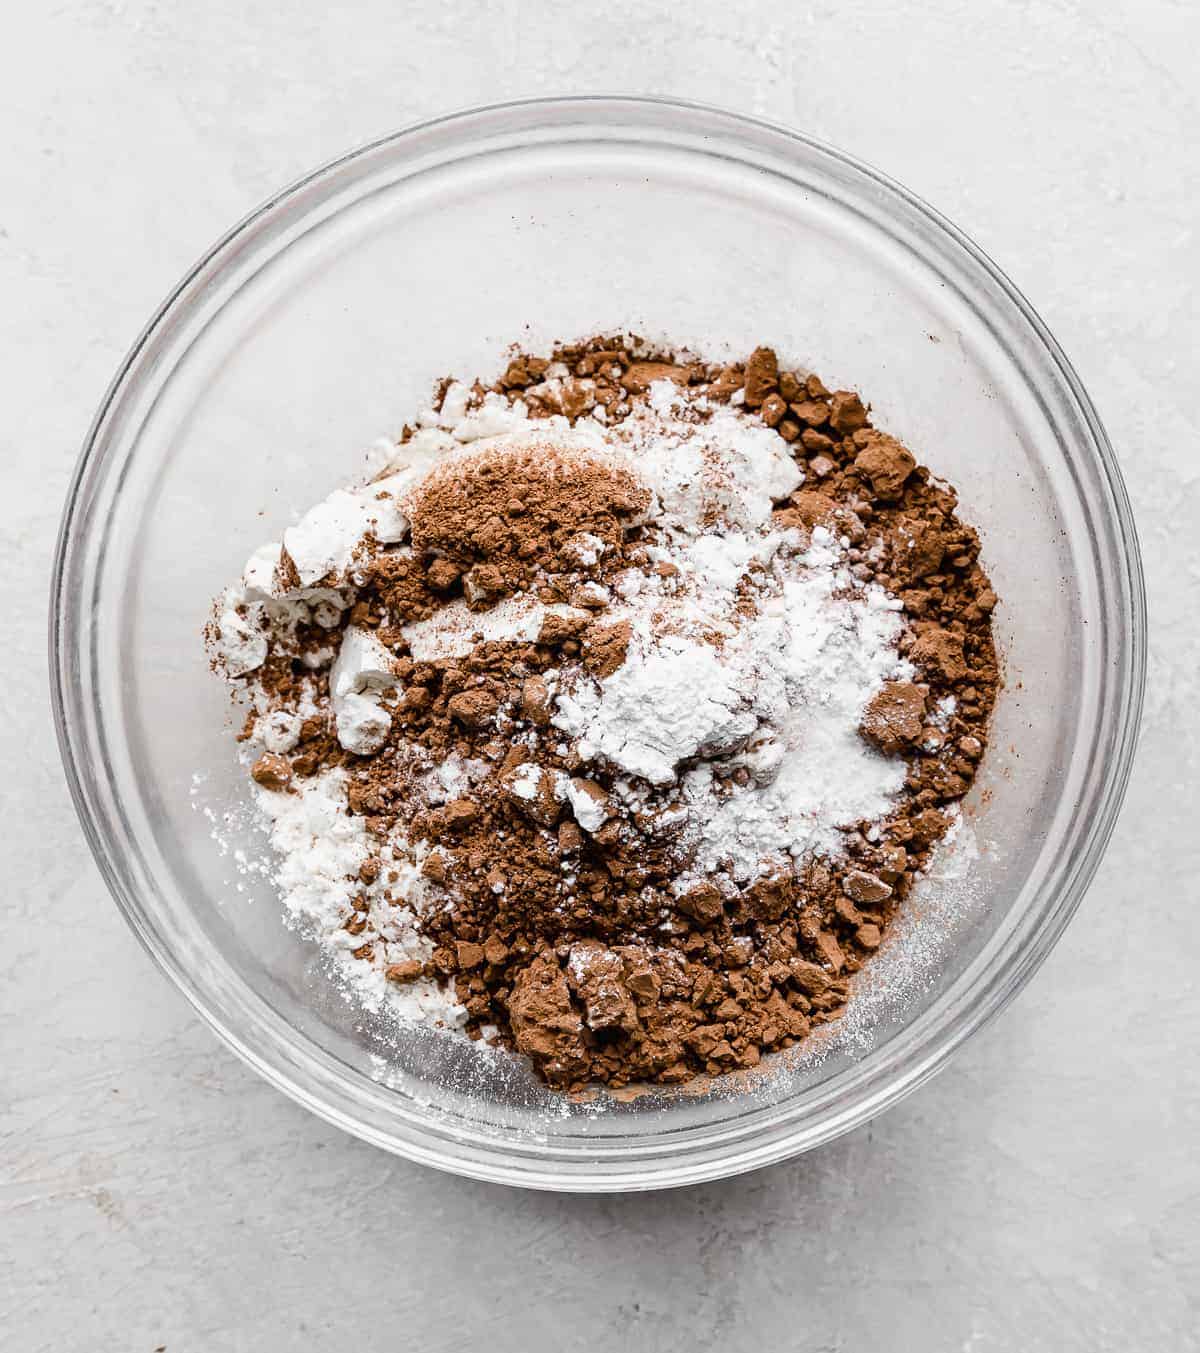 The dry ingredients for making Chocolate Doughnuts in a glass bowl.